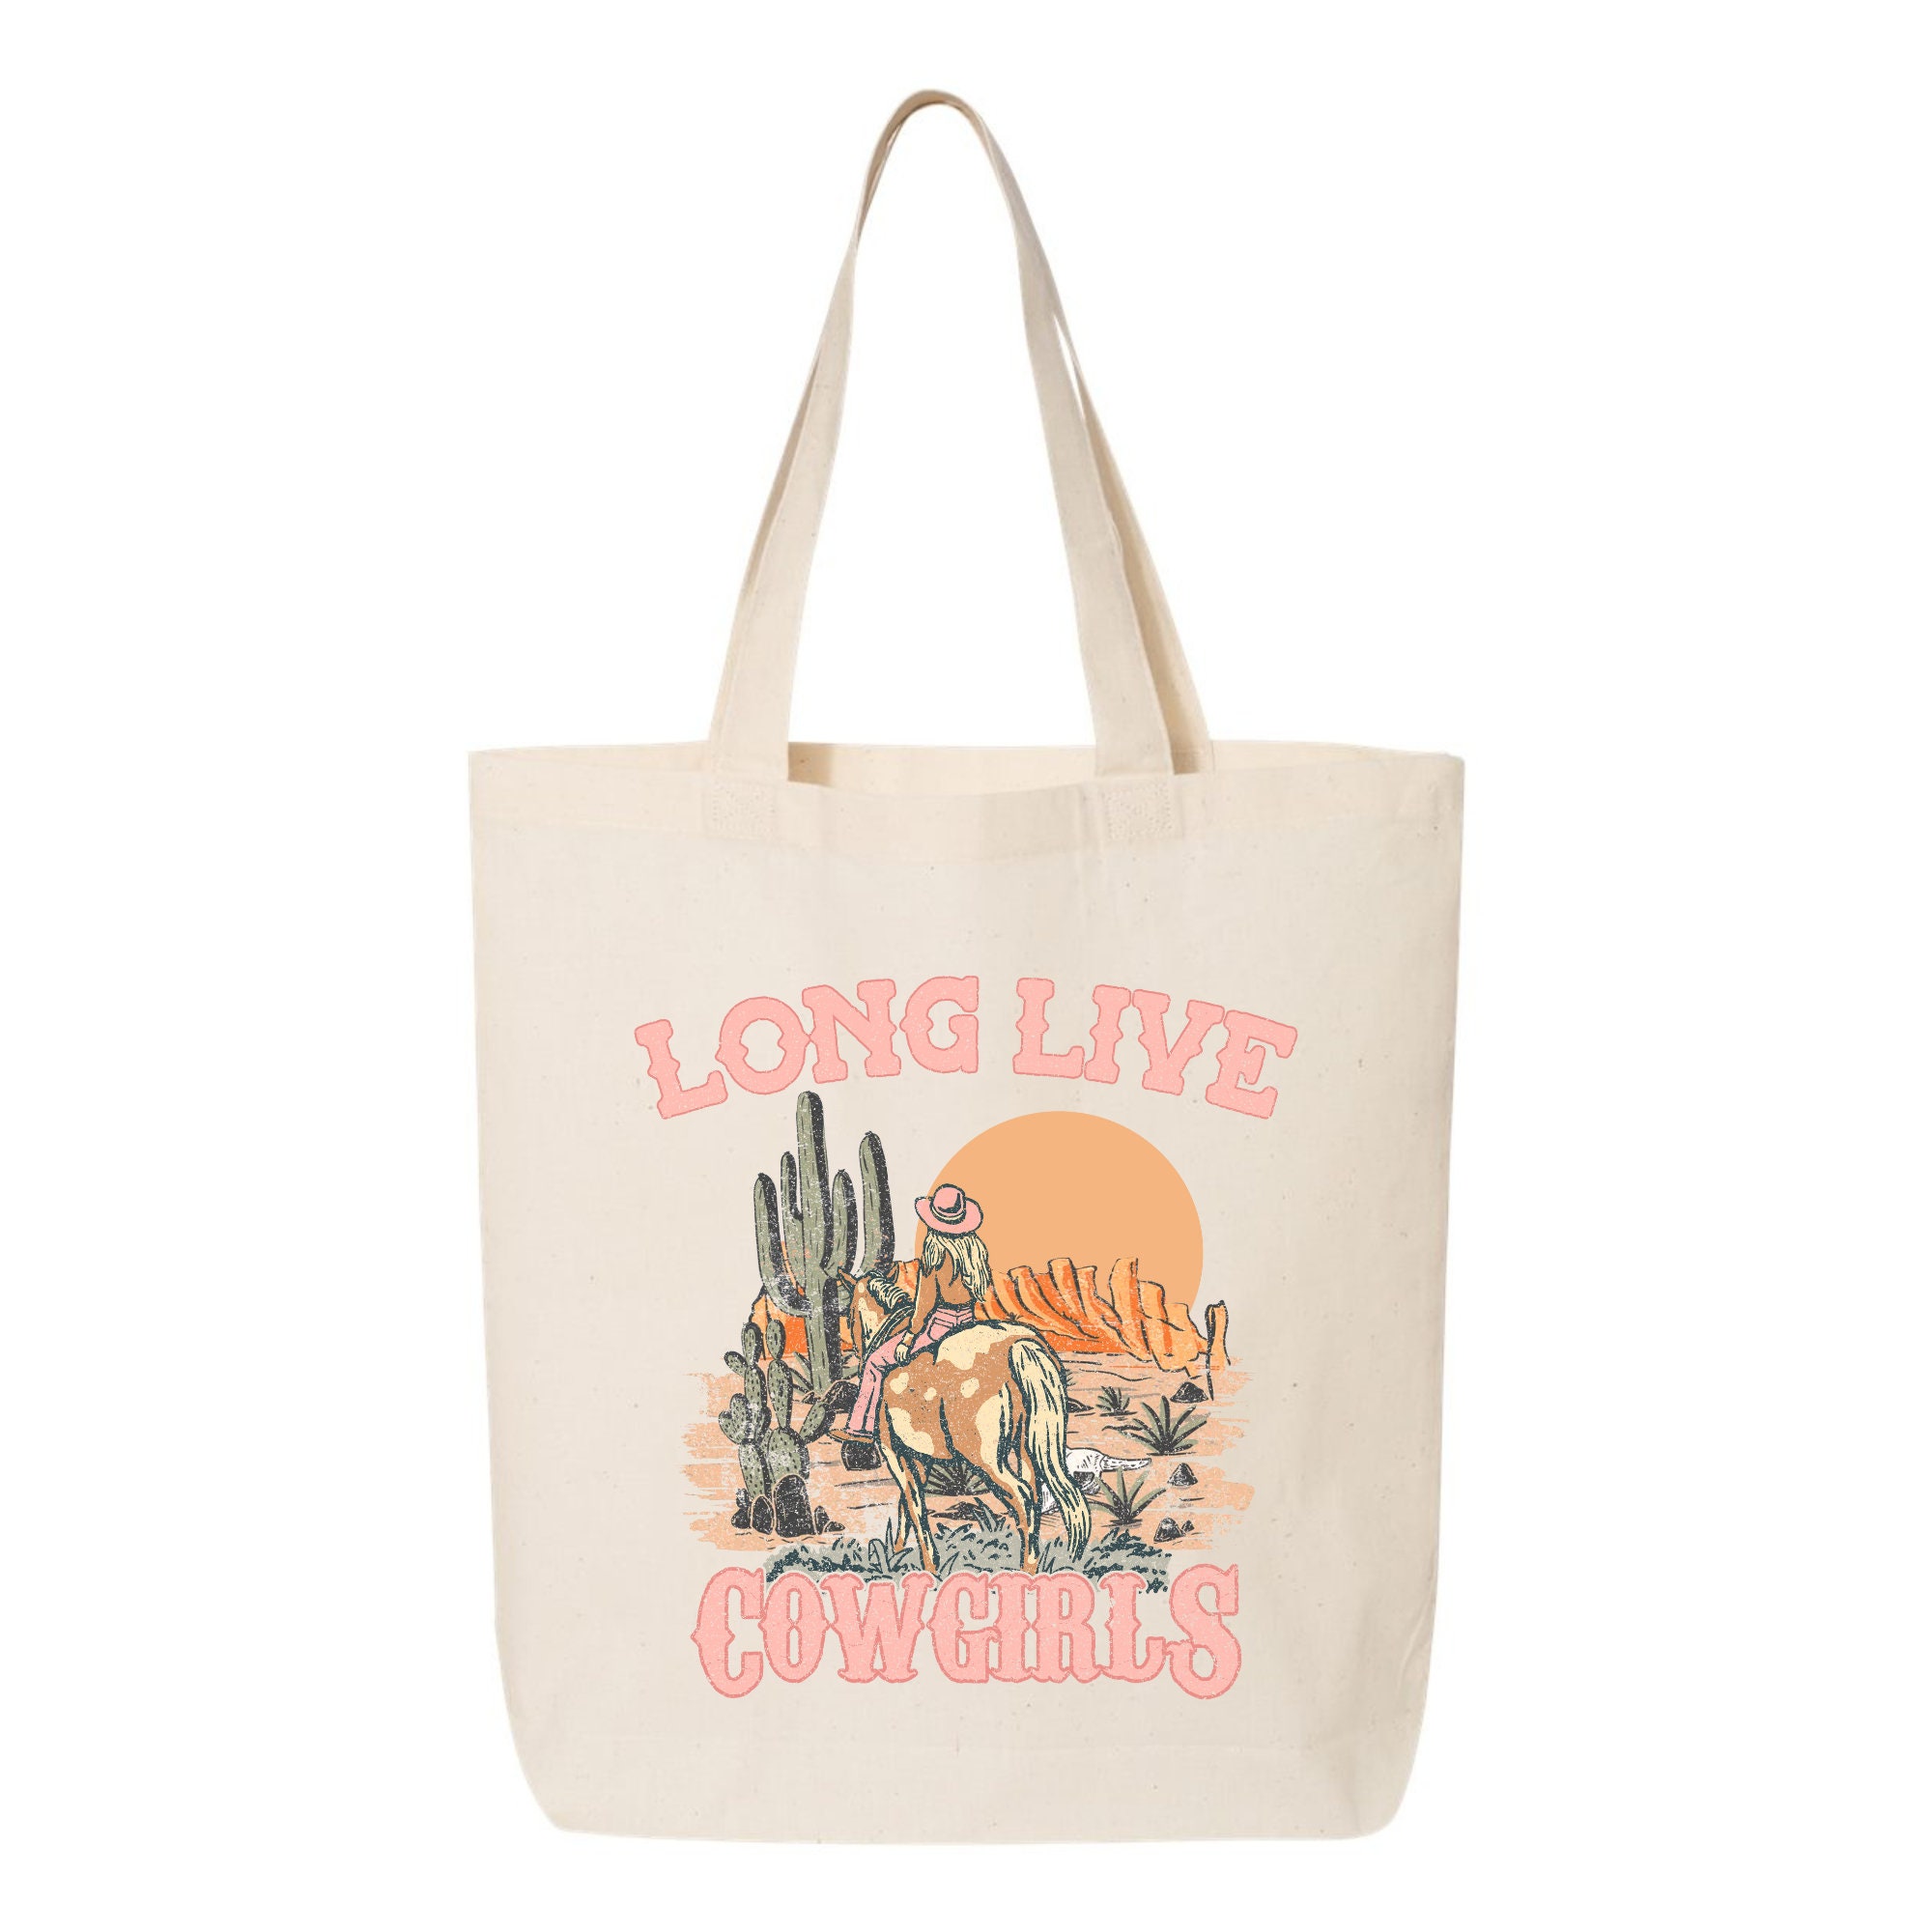 Western Long Live Cowgirls Canvas Tote Bag Retro Country Tote - Etsy